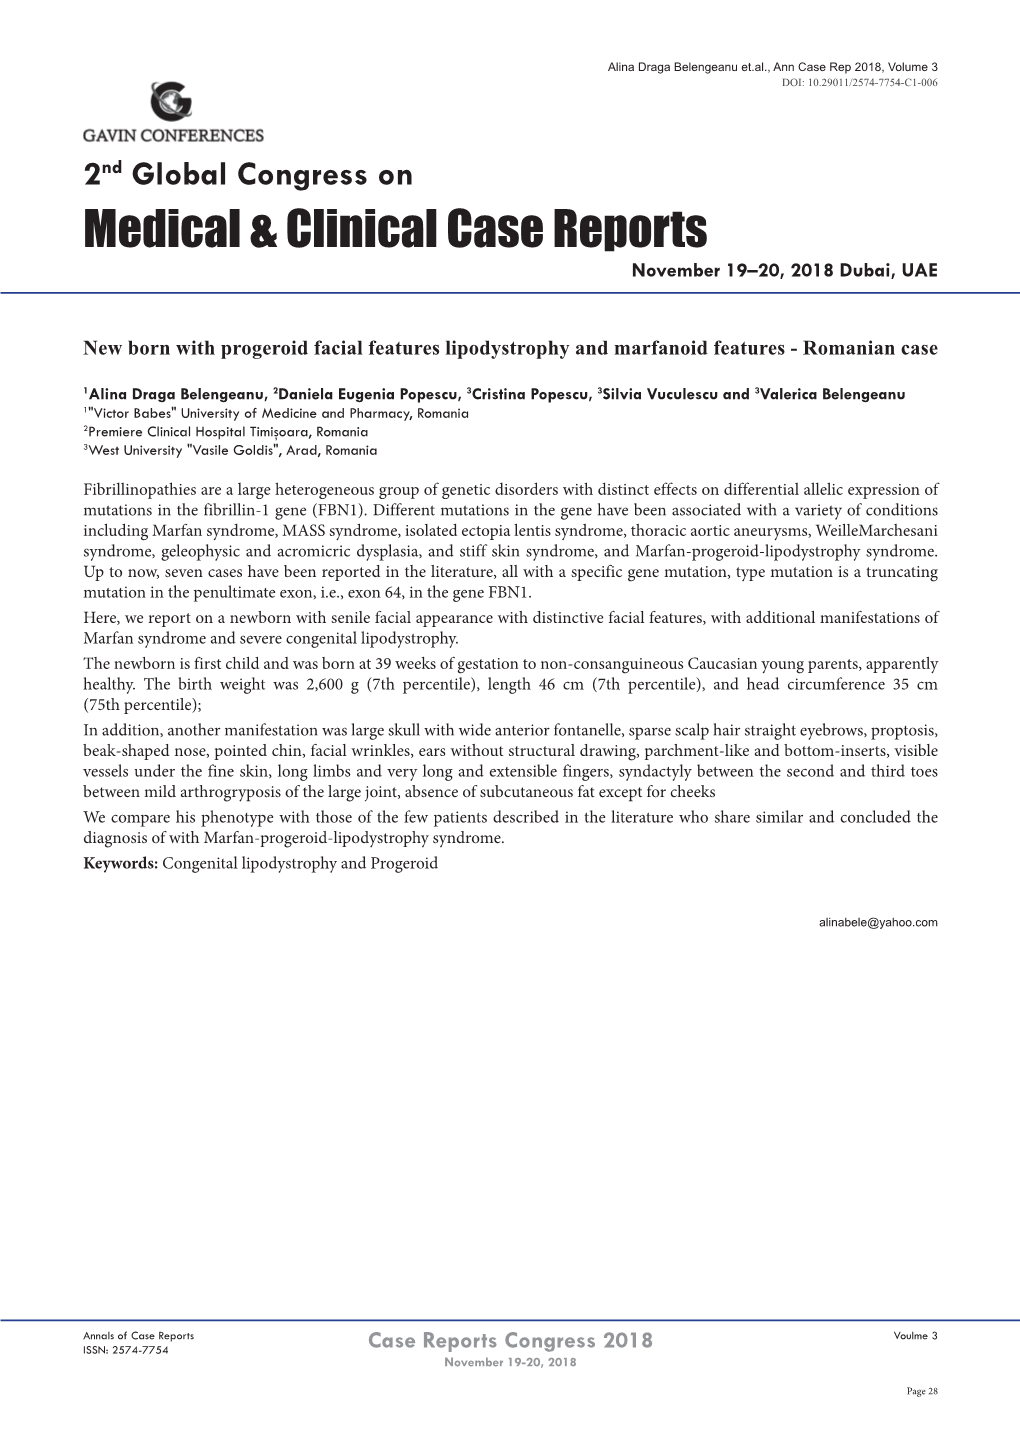 Medical & Clinical Case Reports